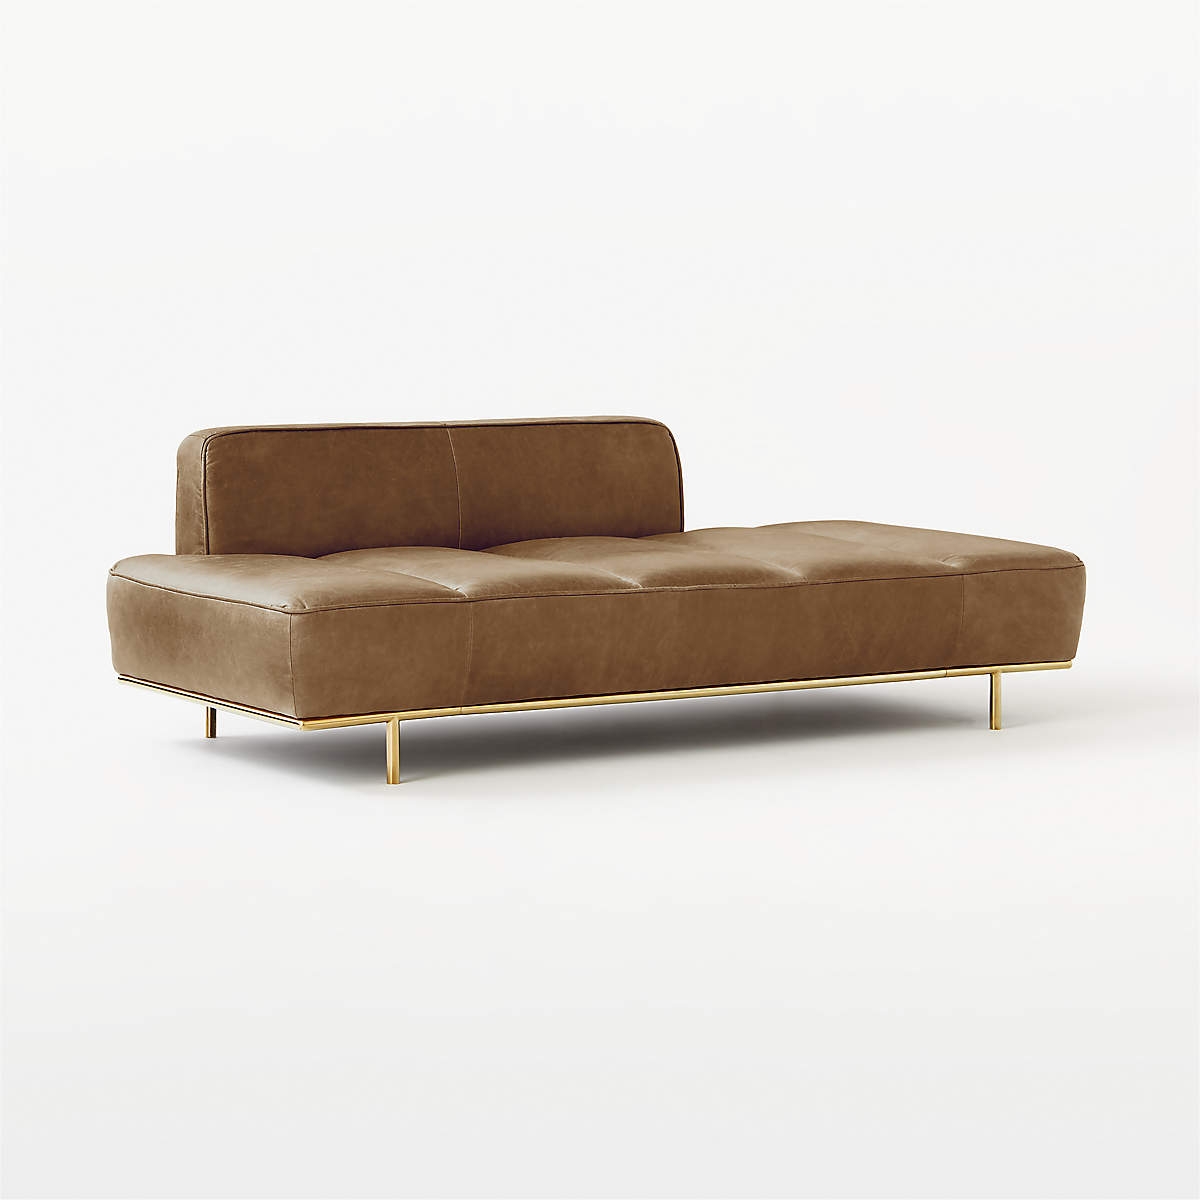 Lawndale Saddle Brown Leather Daybed with Brass Base - Image 2